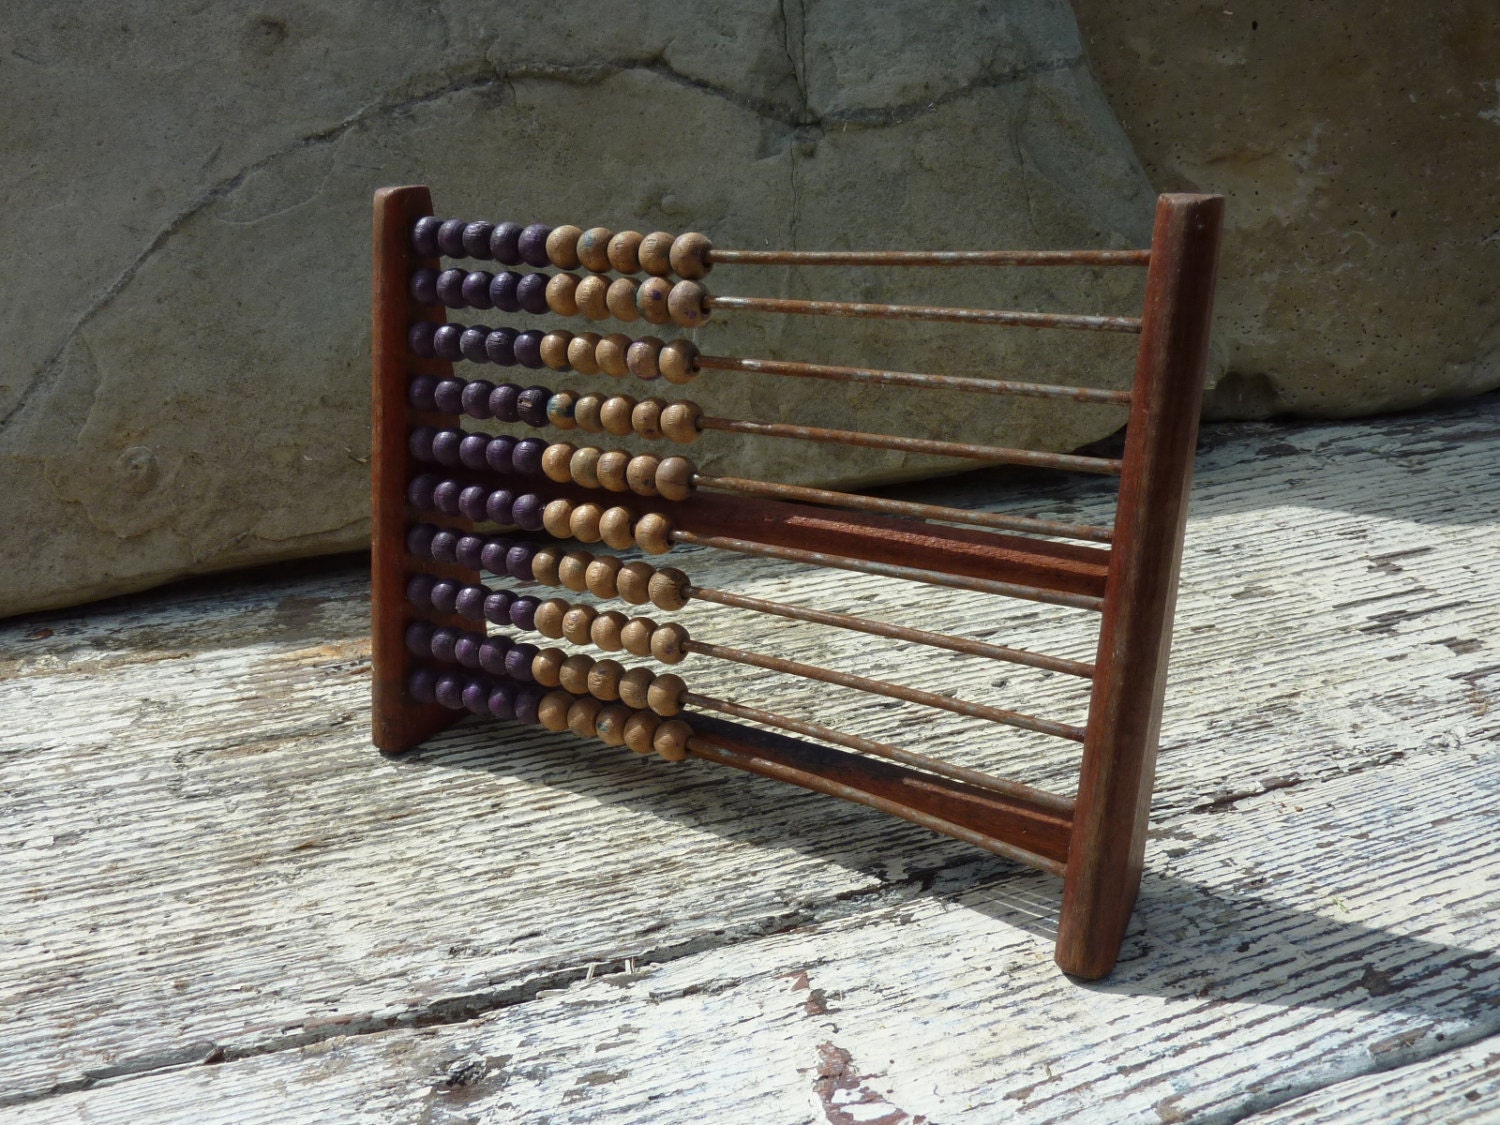 antique wooden abacus